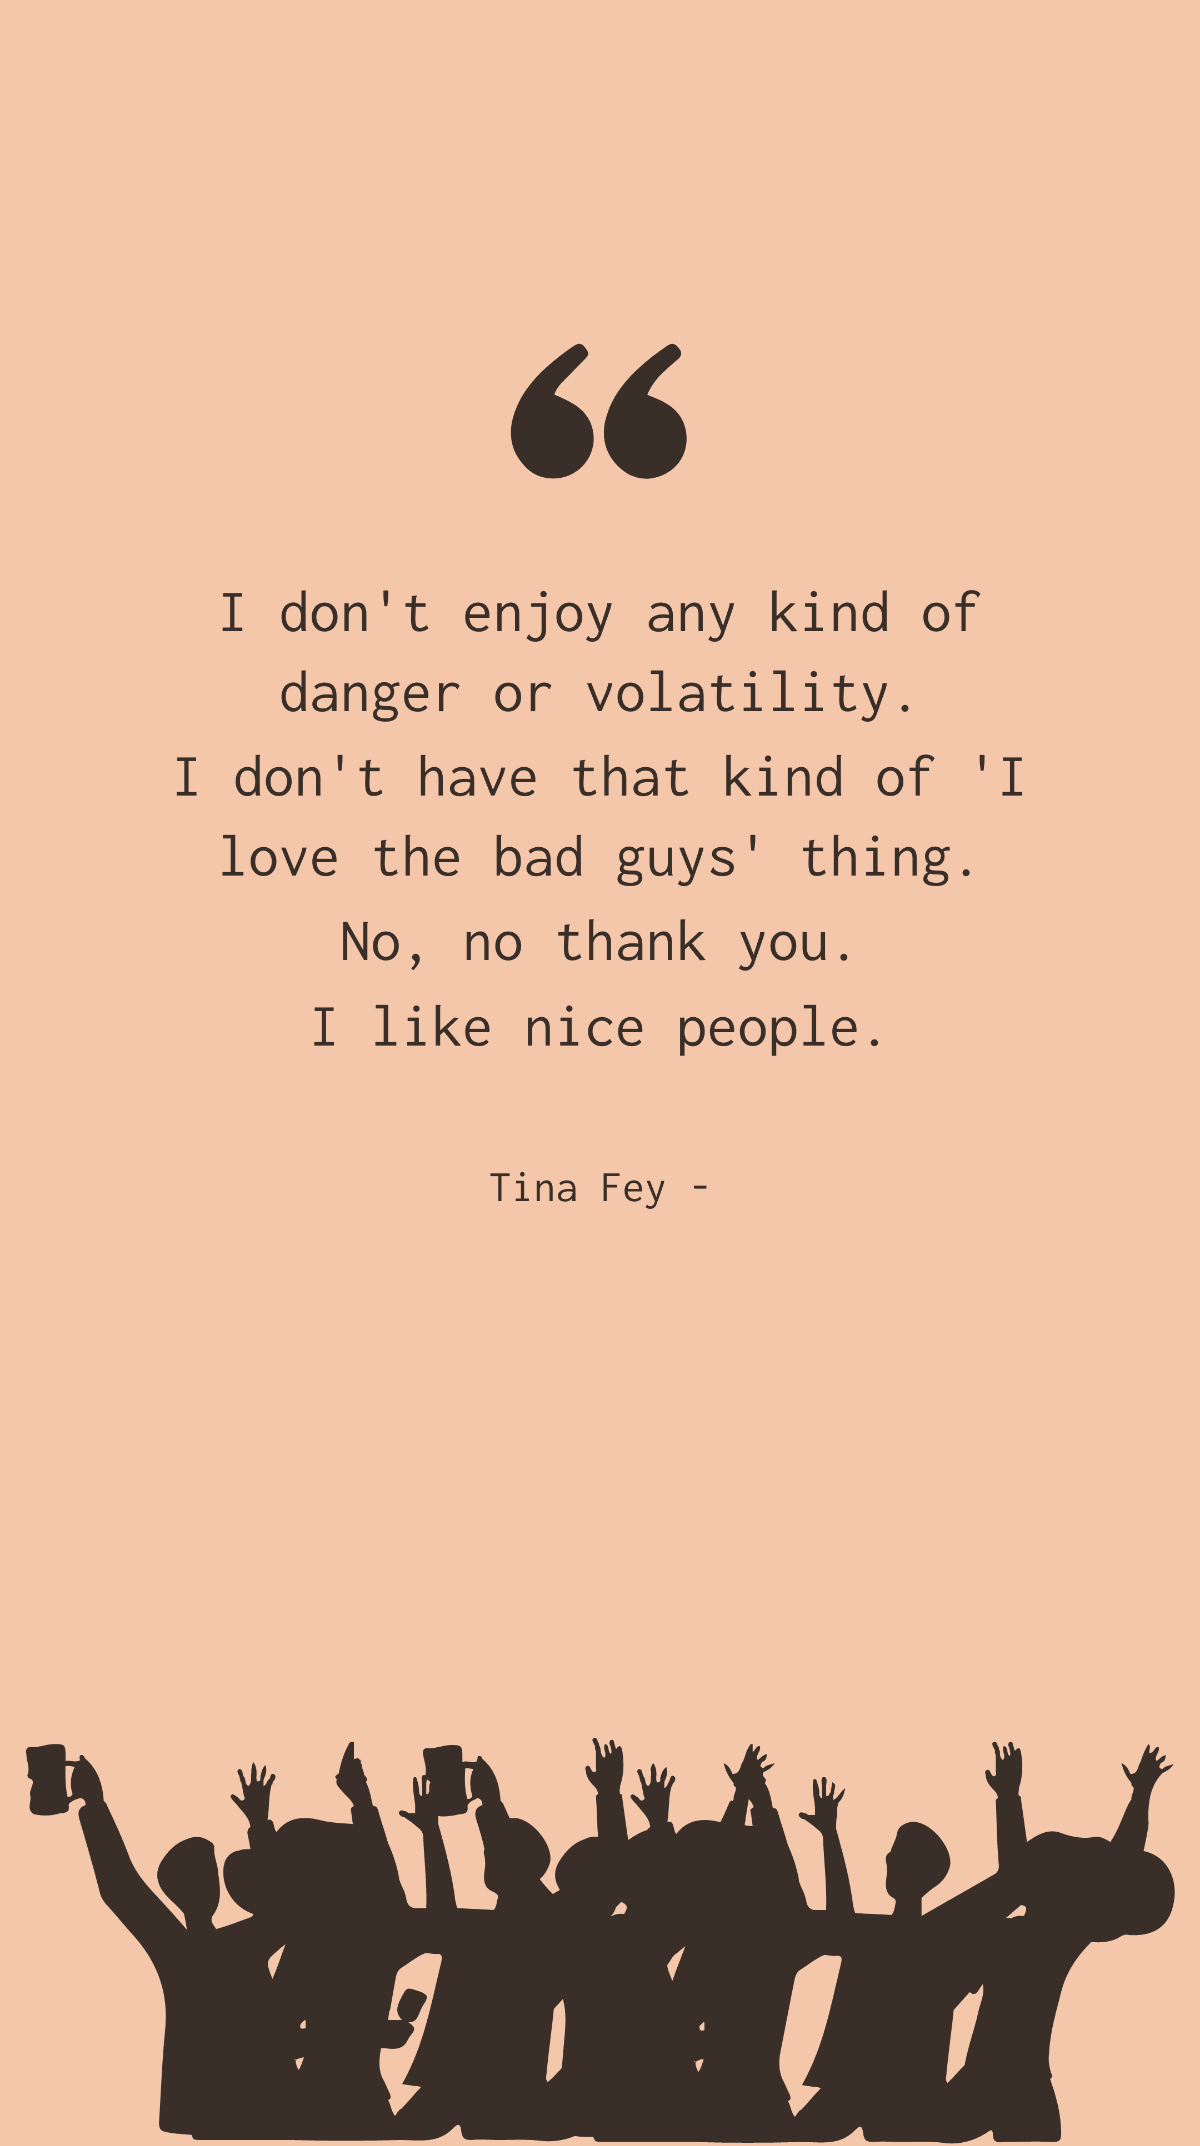 Free Tina Fey - I don't enjoy any kind of danger or volatility. I don't have that kind of 'I love the bad guys' thing. No, no thank you. I like nice people. Template